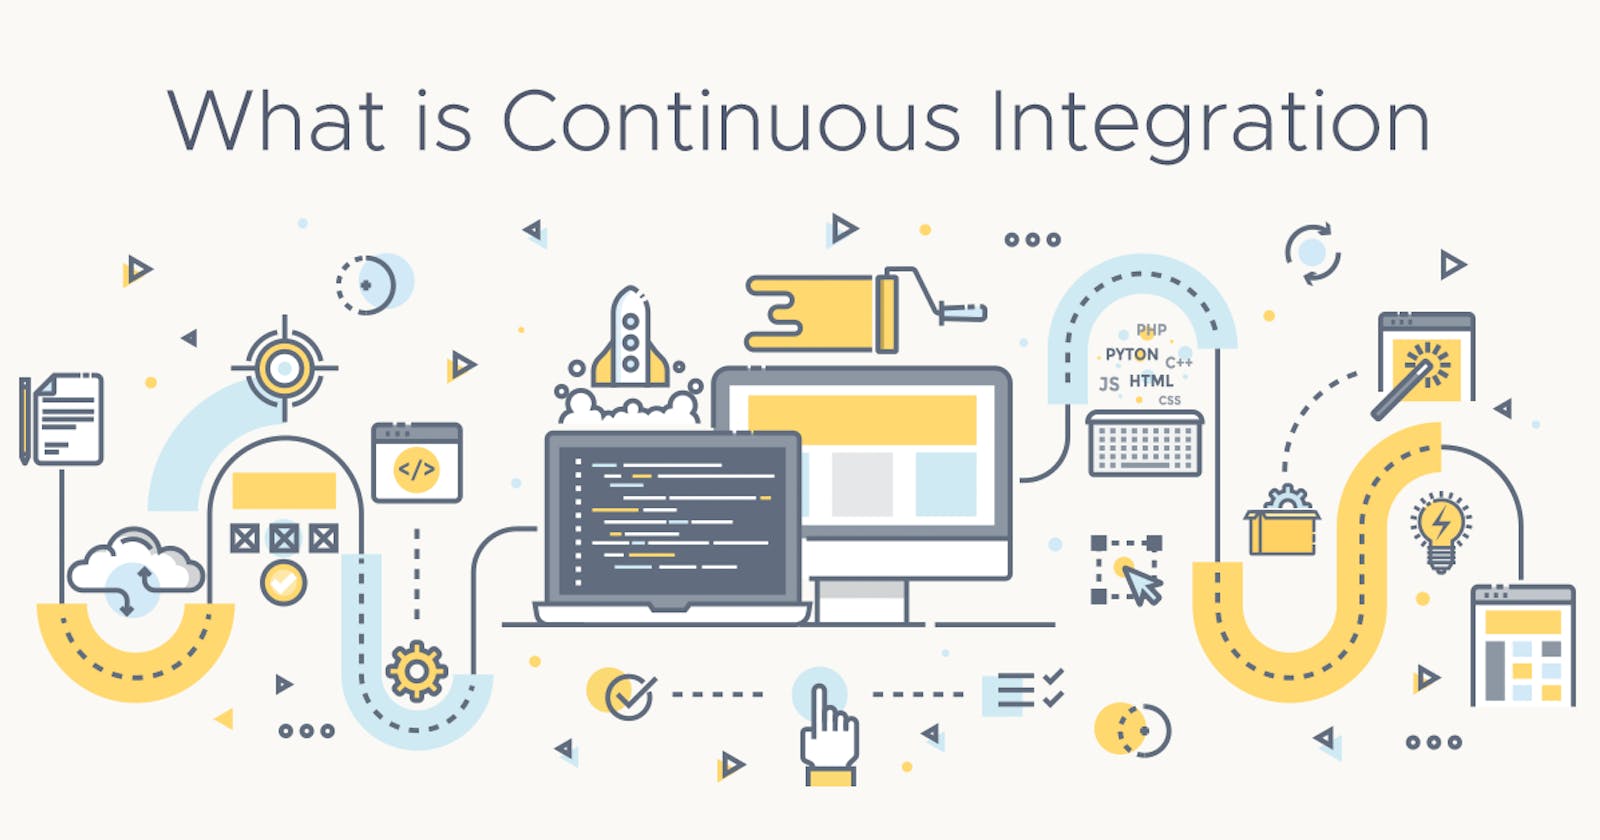 Implementing Continuous Integration